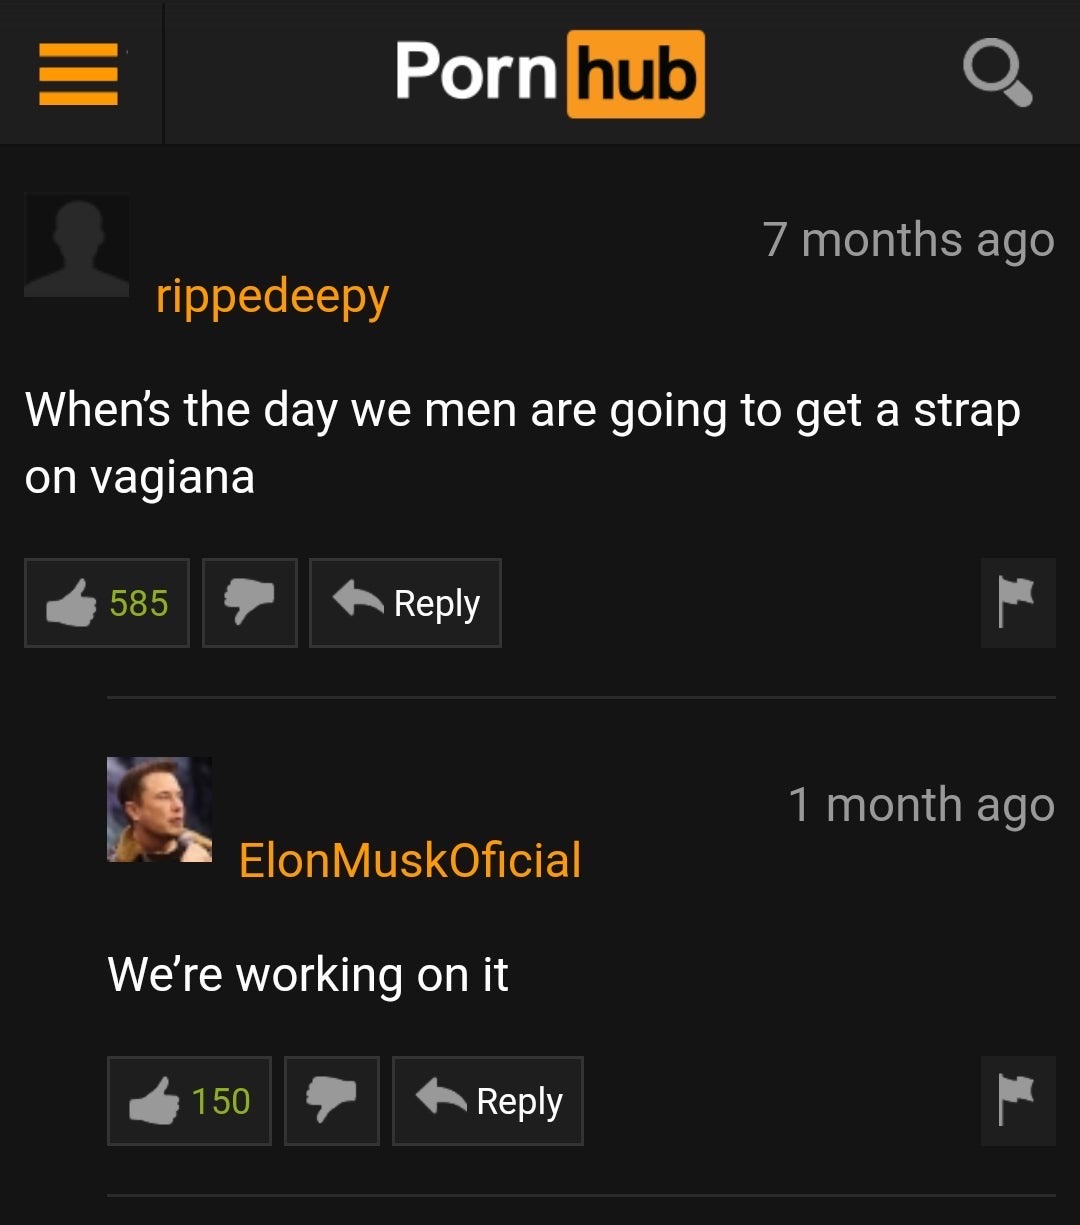 screenshot - Porn hub Q 7 months ago rippedeepy When's the day we men are going to get a strap on vagiana '1 month ago Elon MuskOficial We're working on it 150